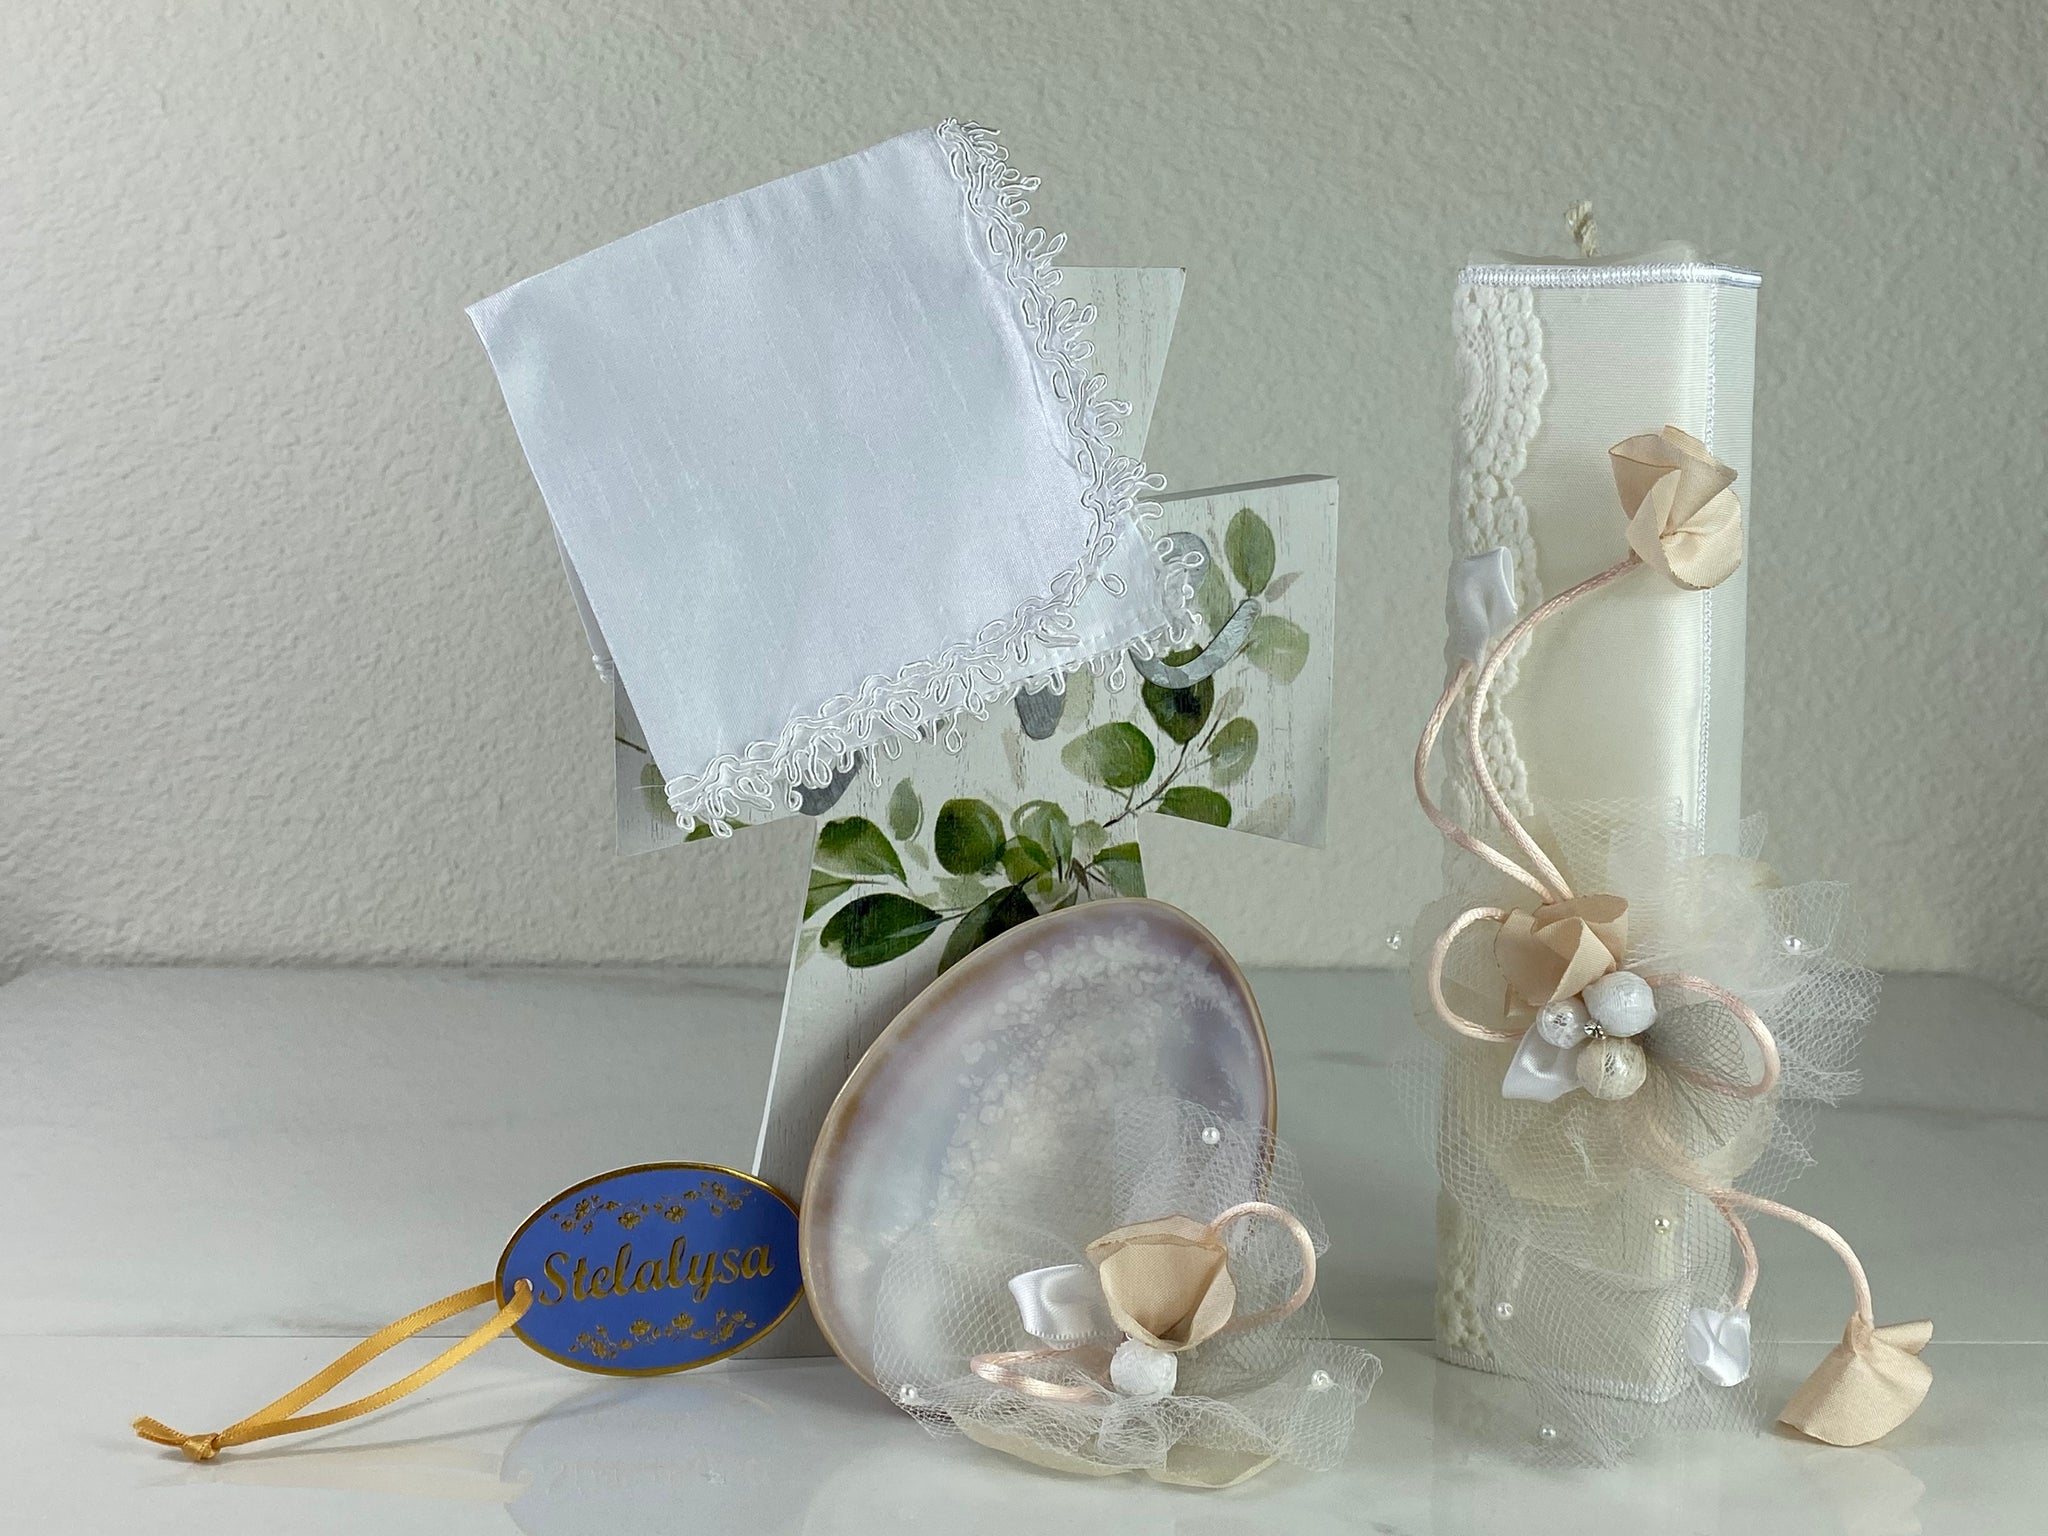 These one-of-a-kind Candle set is handmade and ivory in color.  This candle has an elegant look.   It is uniquely decorated with crystals, lace, tulle, and ribbons making it a gorgeous keepsake.   This candle is rectangle in shape.    To match, the Shell is put together piece by piece to compliment the Candle and Handkerchief.  The Handkerchief is made of satin and embroidered lace to match the Shell and Candle beautifully.  